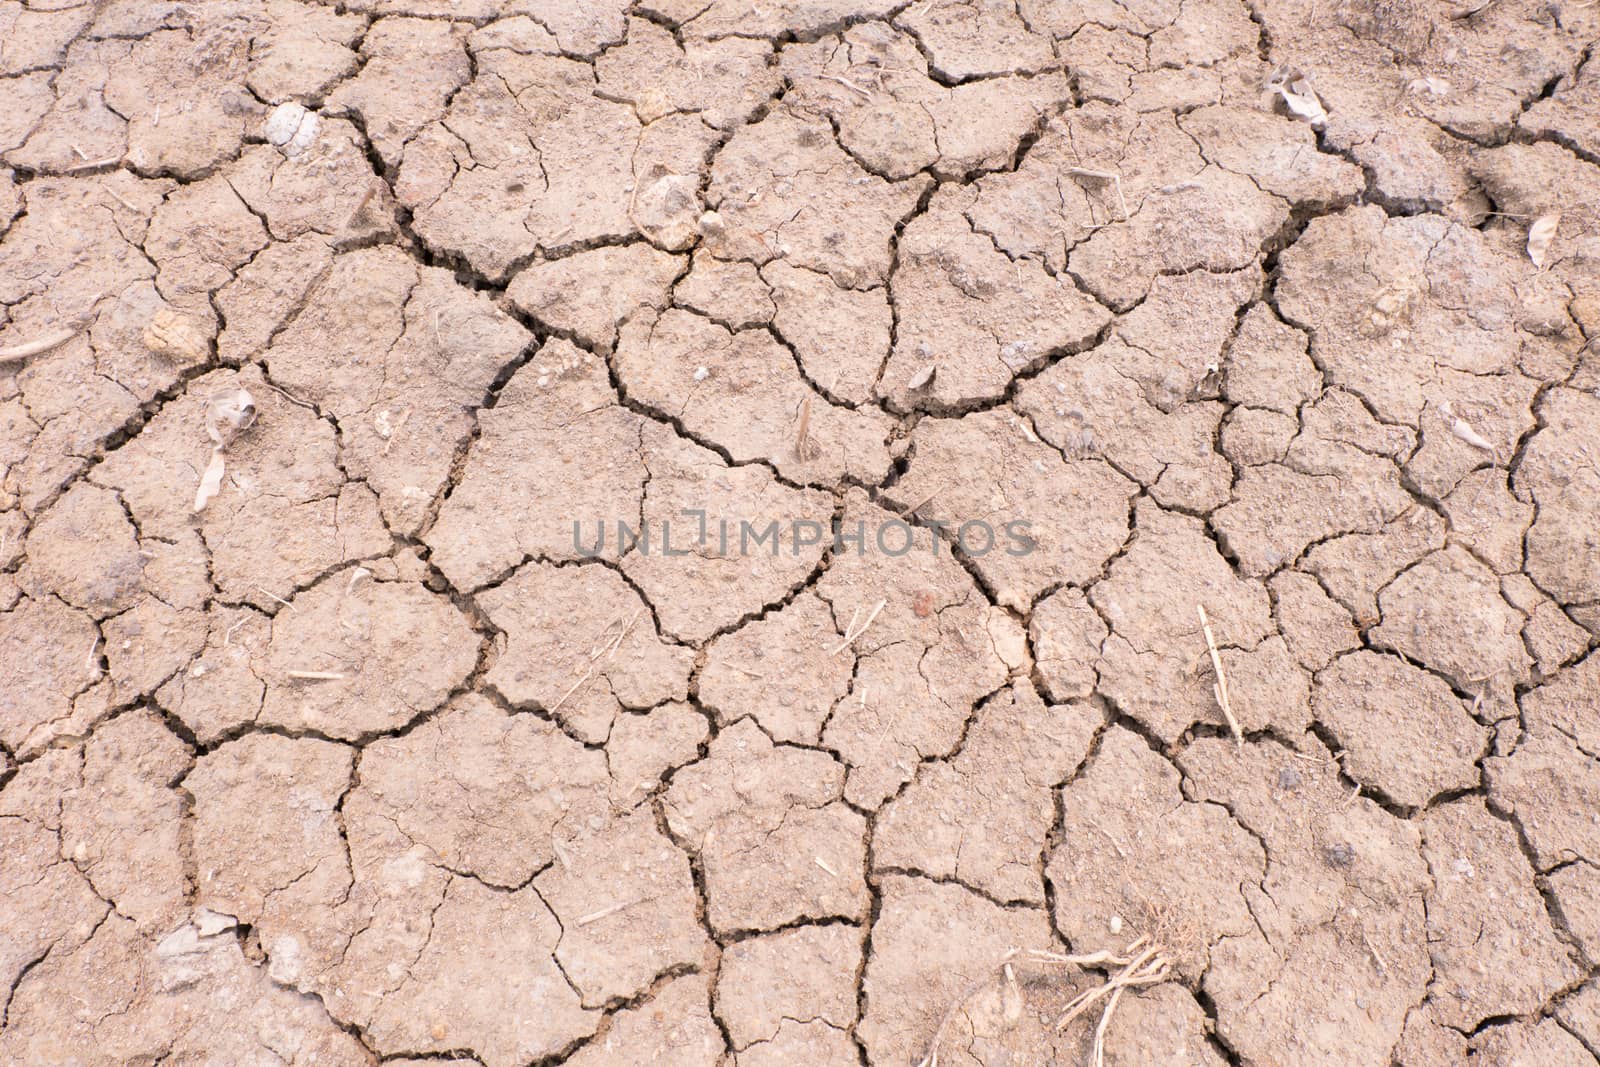 Dry cracked earth texture by Soranop01